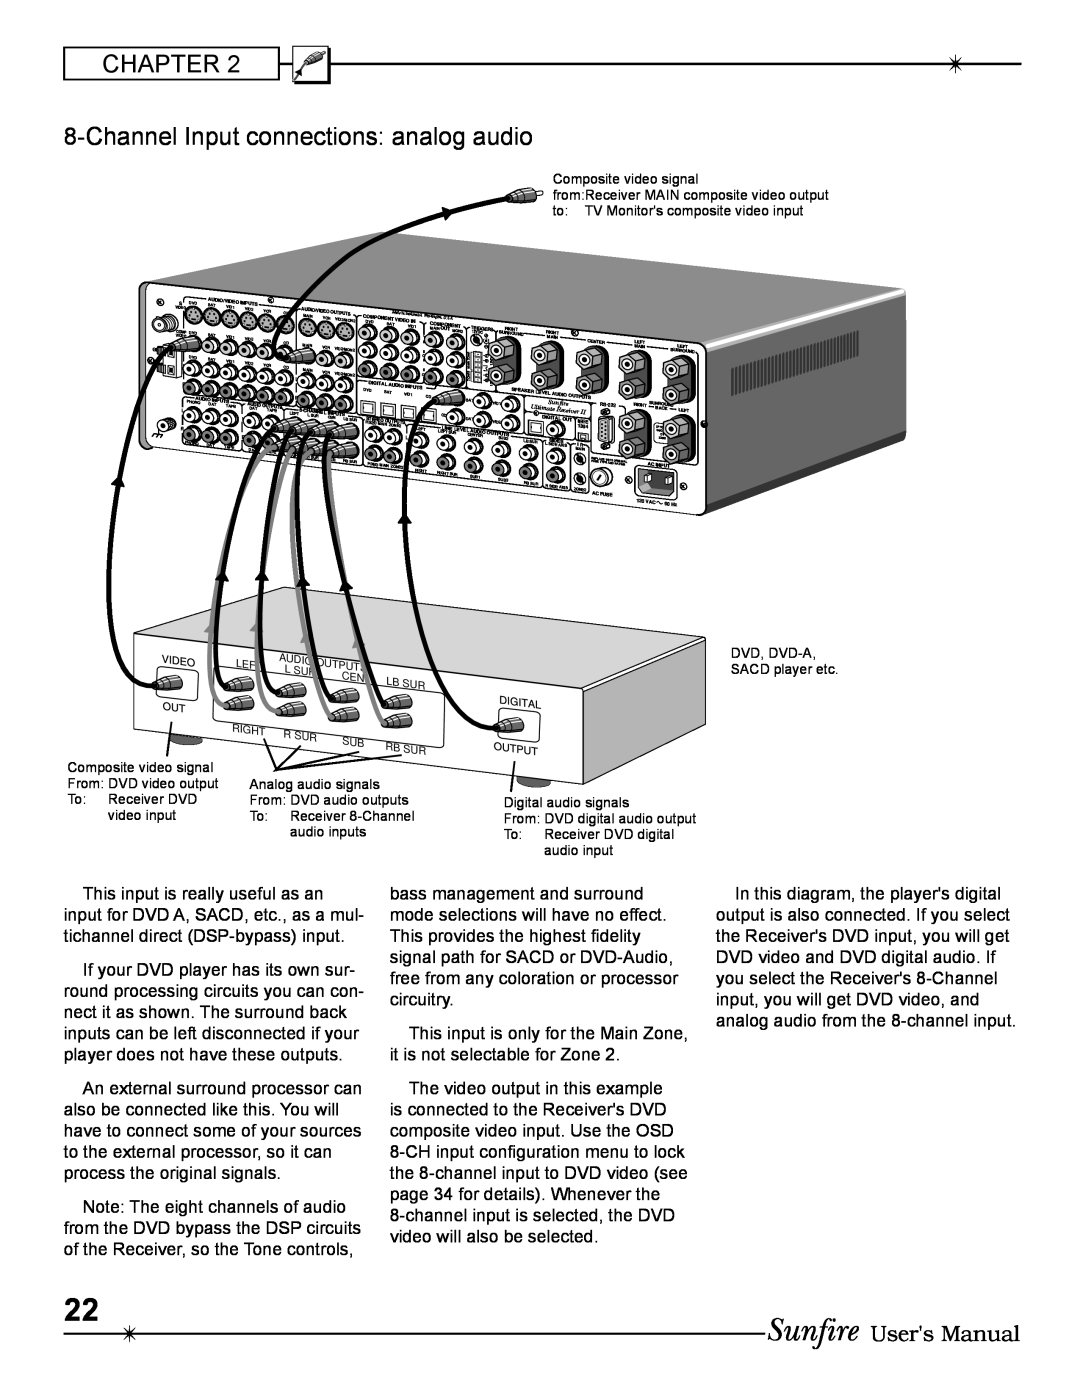 Sunfire Radio manual Chapter, ChannelInput connections analog audio, Users Manual 